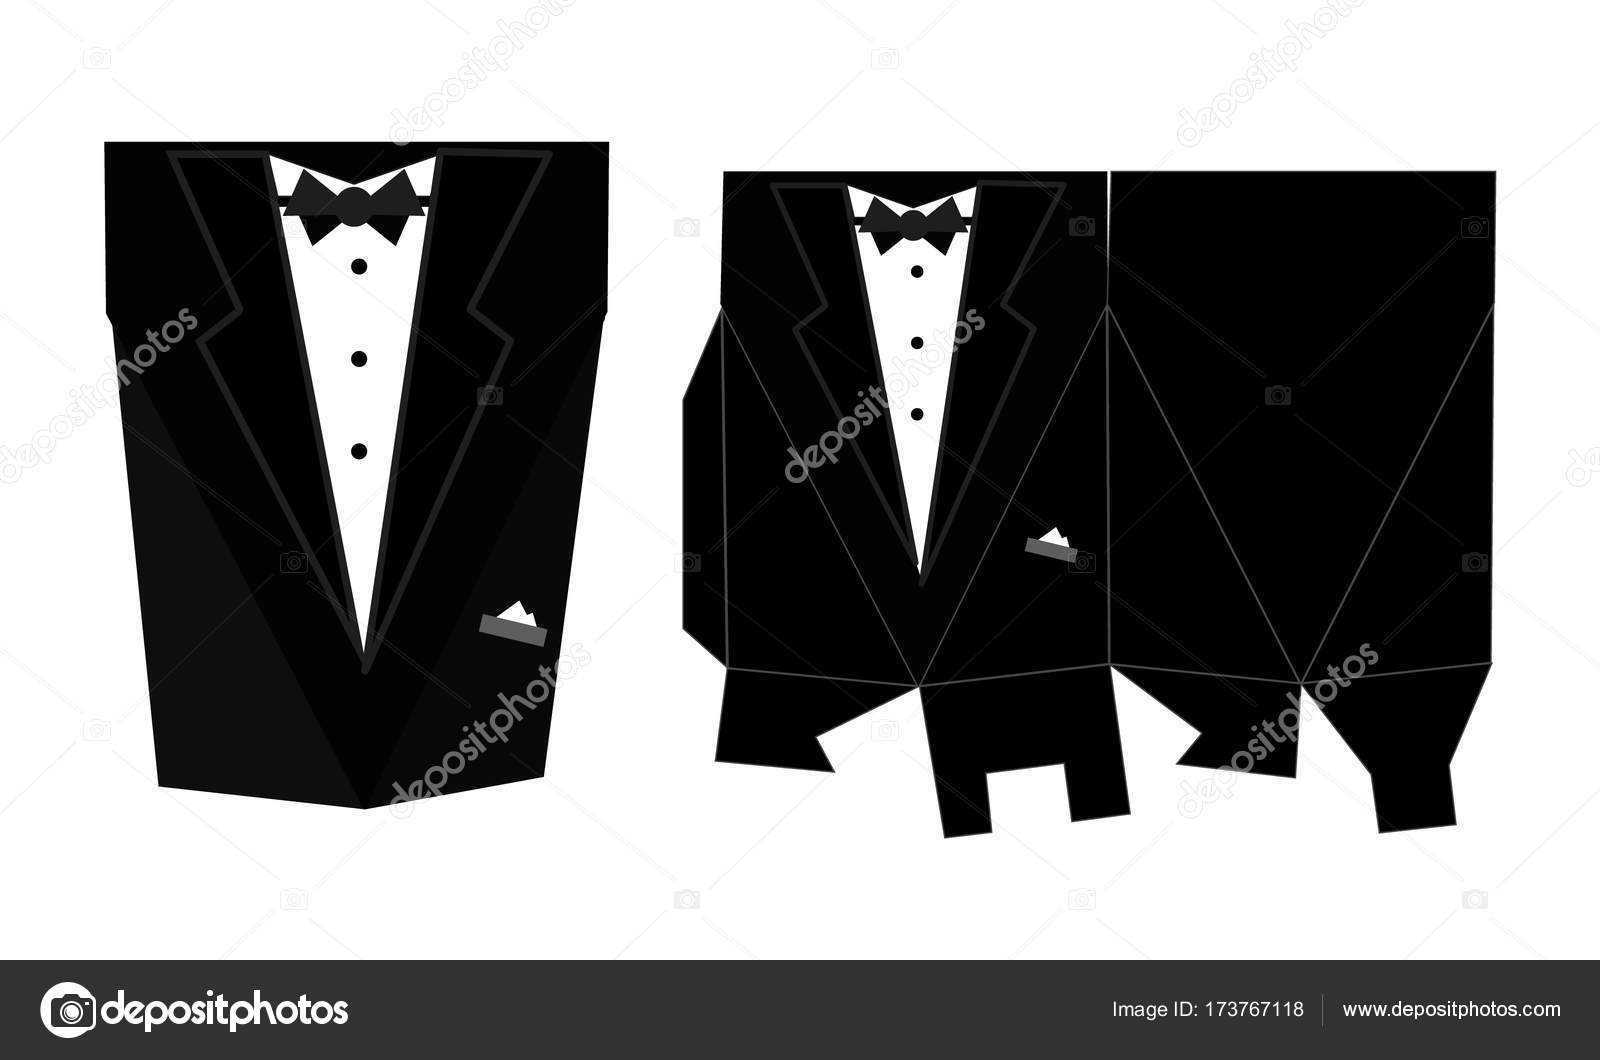 printable-tuxedo-template-tuxedo-printable-square-packaging-with